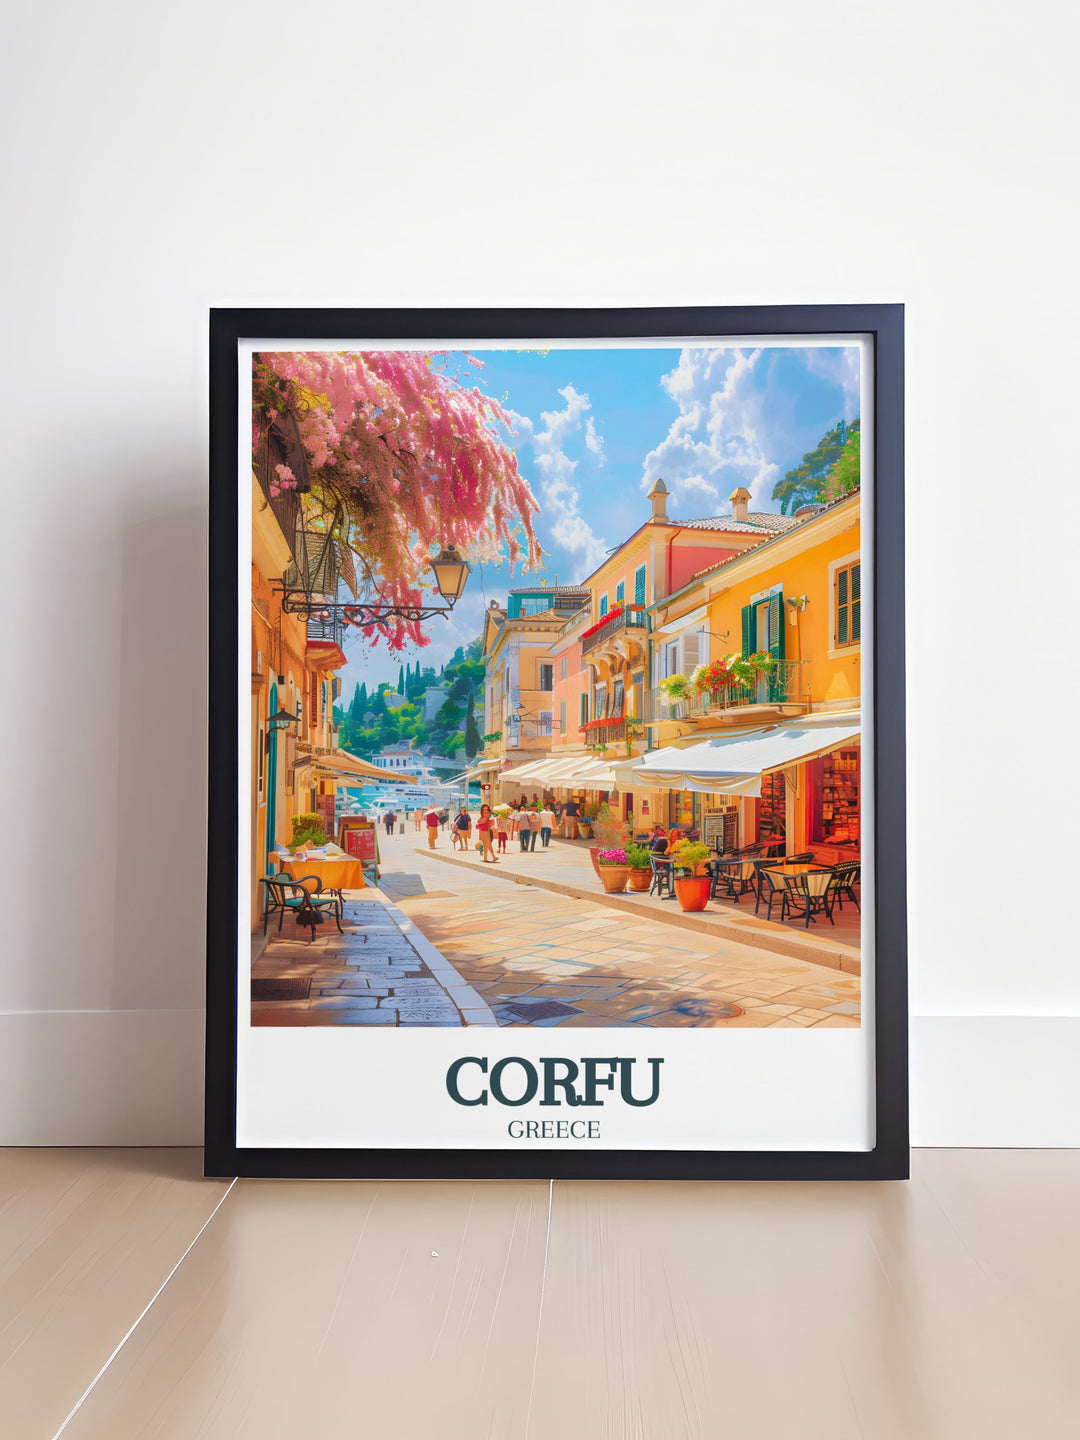 Corfu Greece print of Old Town Corfu Liston Promenade ideal for those who love Corfu Island art and want to bring a piece of Greek history and stunning seascapes into their homes a perfect gift for travel enthusiasts and art lovers alike